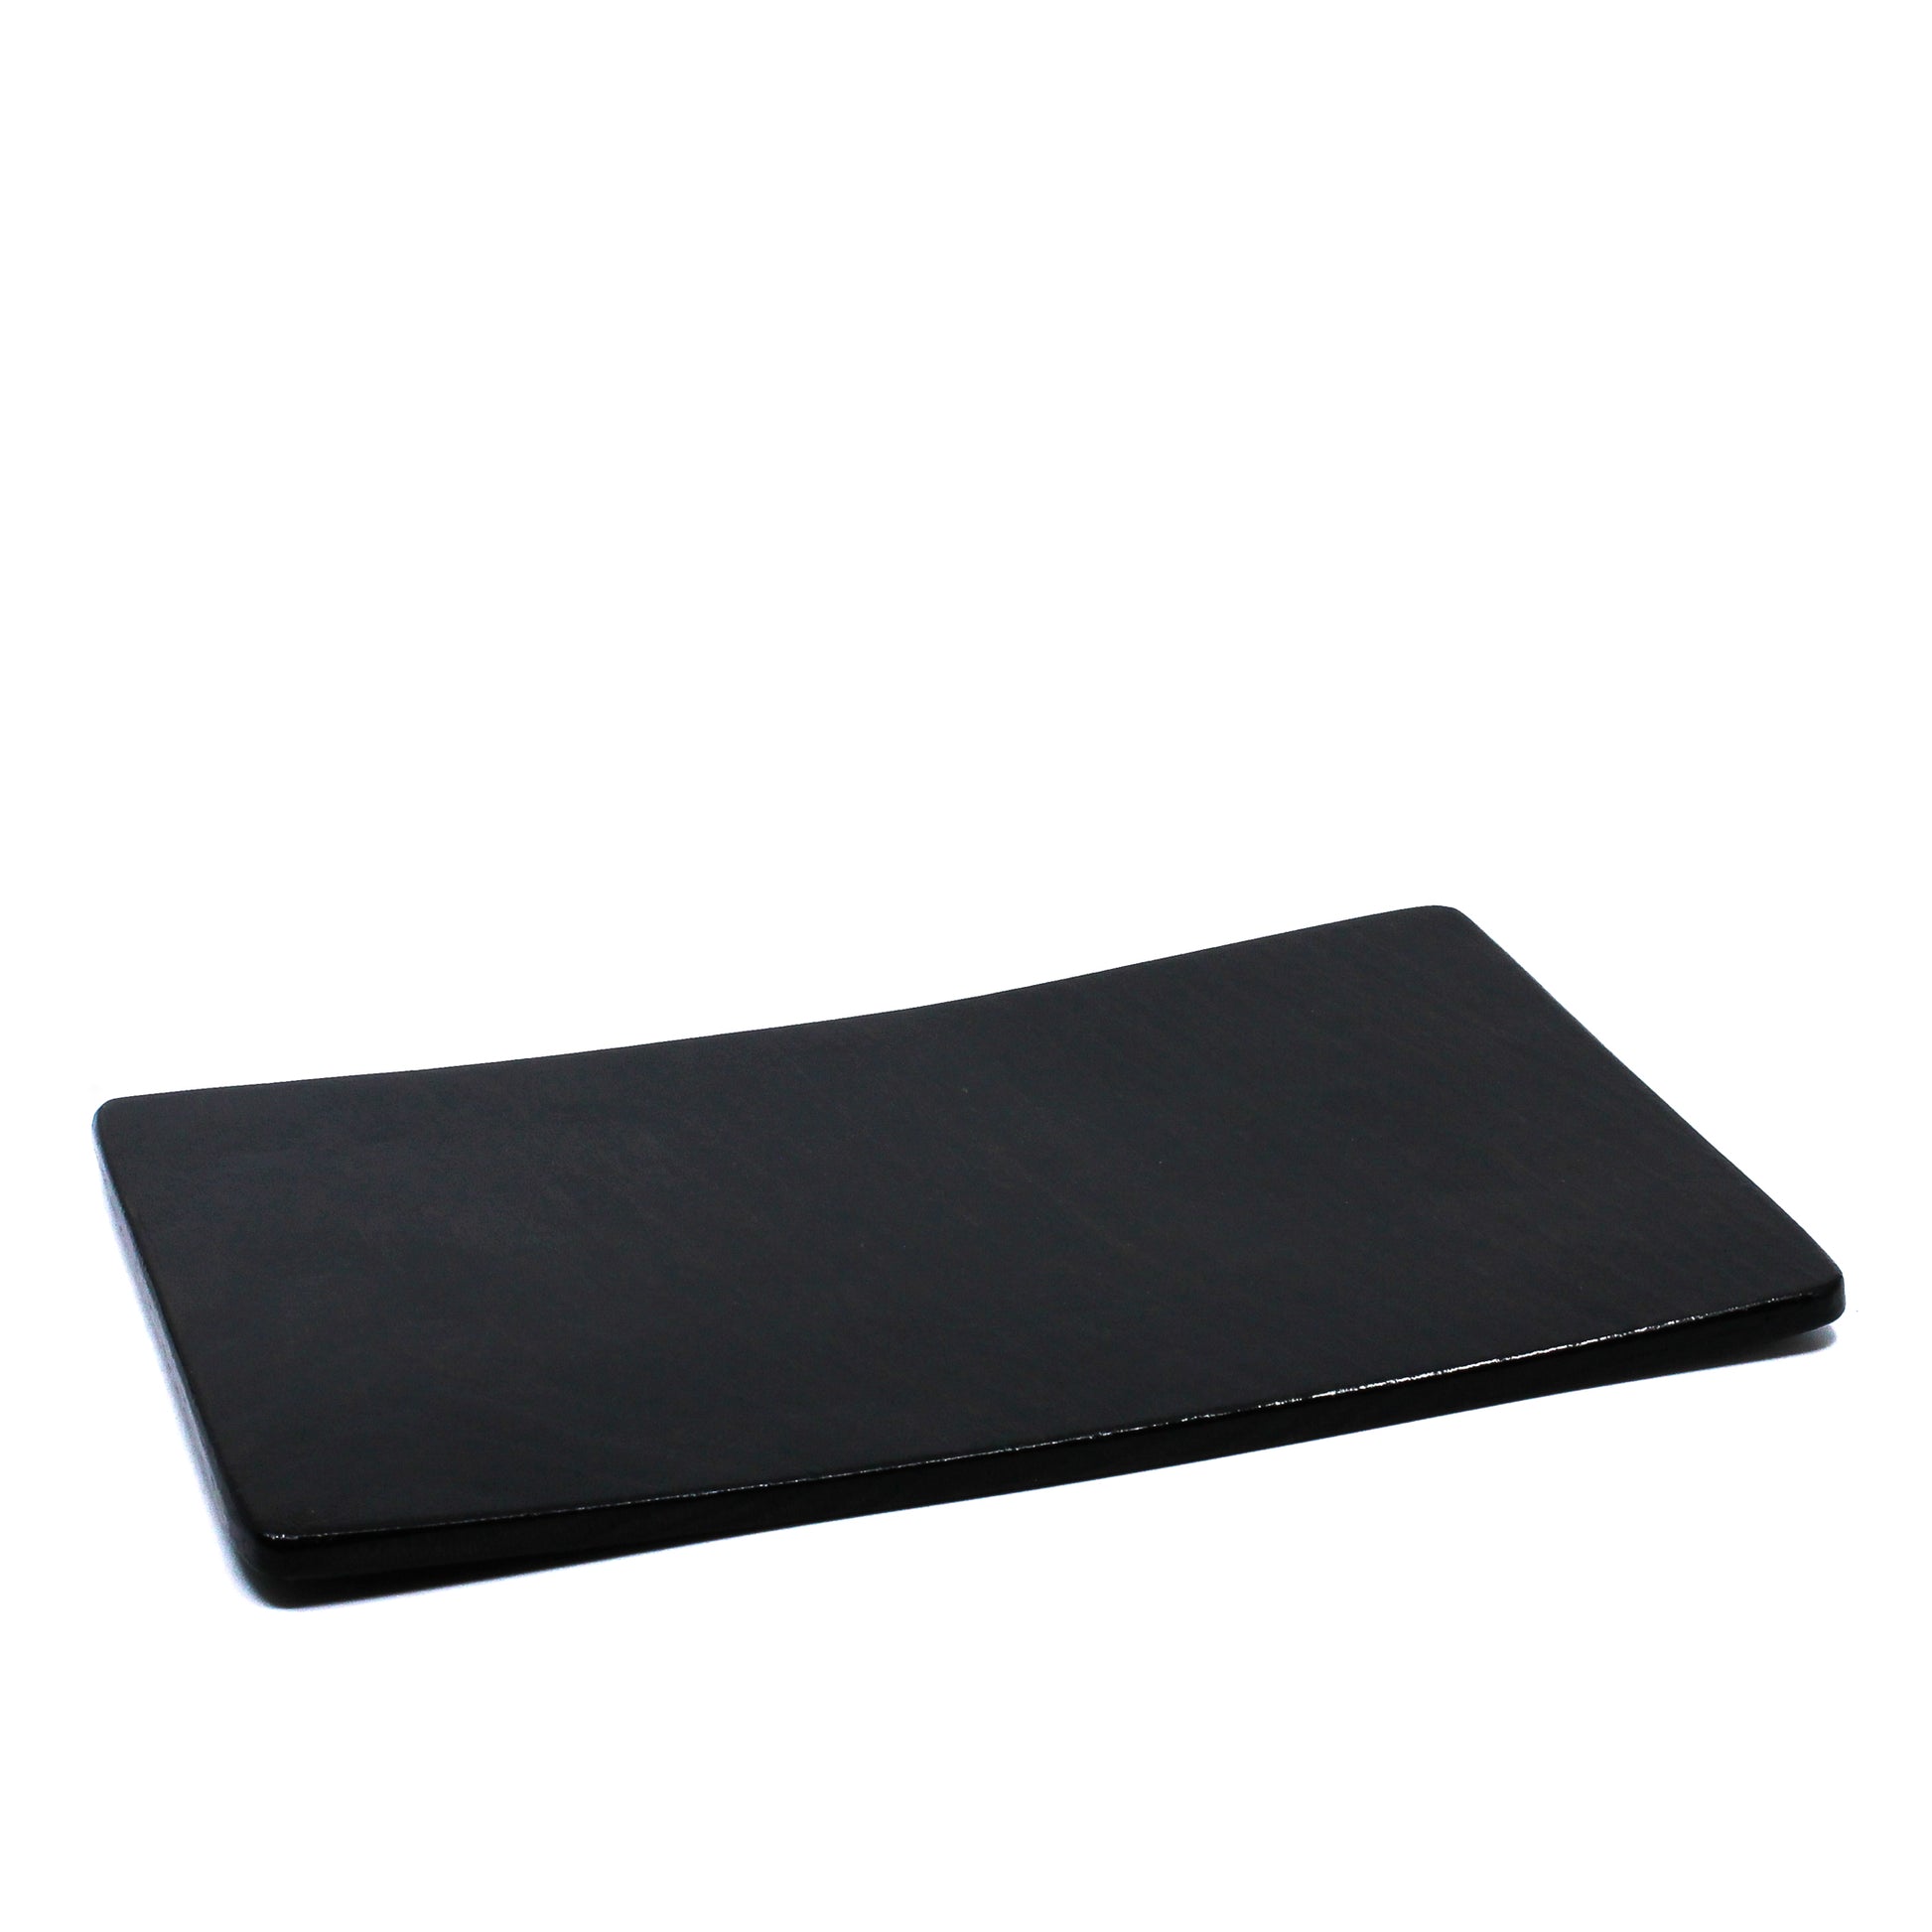 Thick black sushi tray with a warp